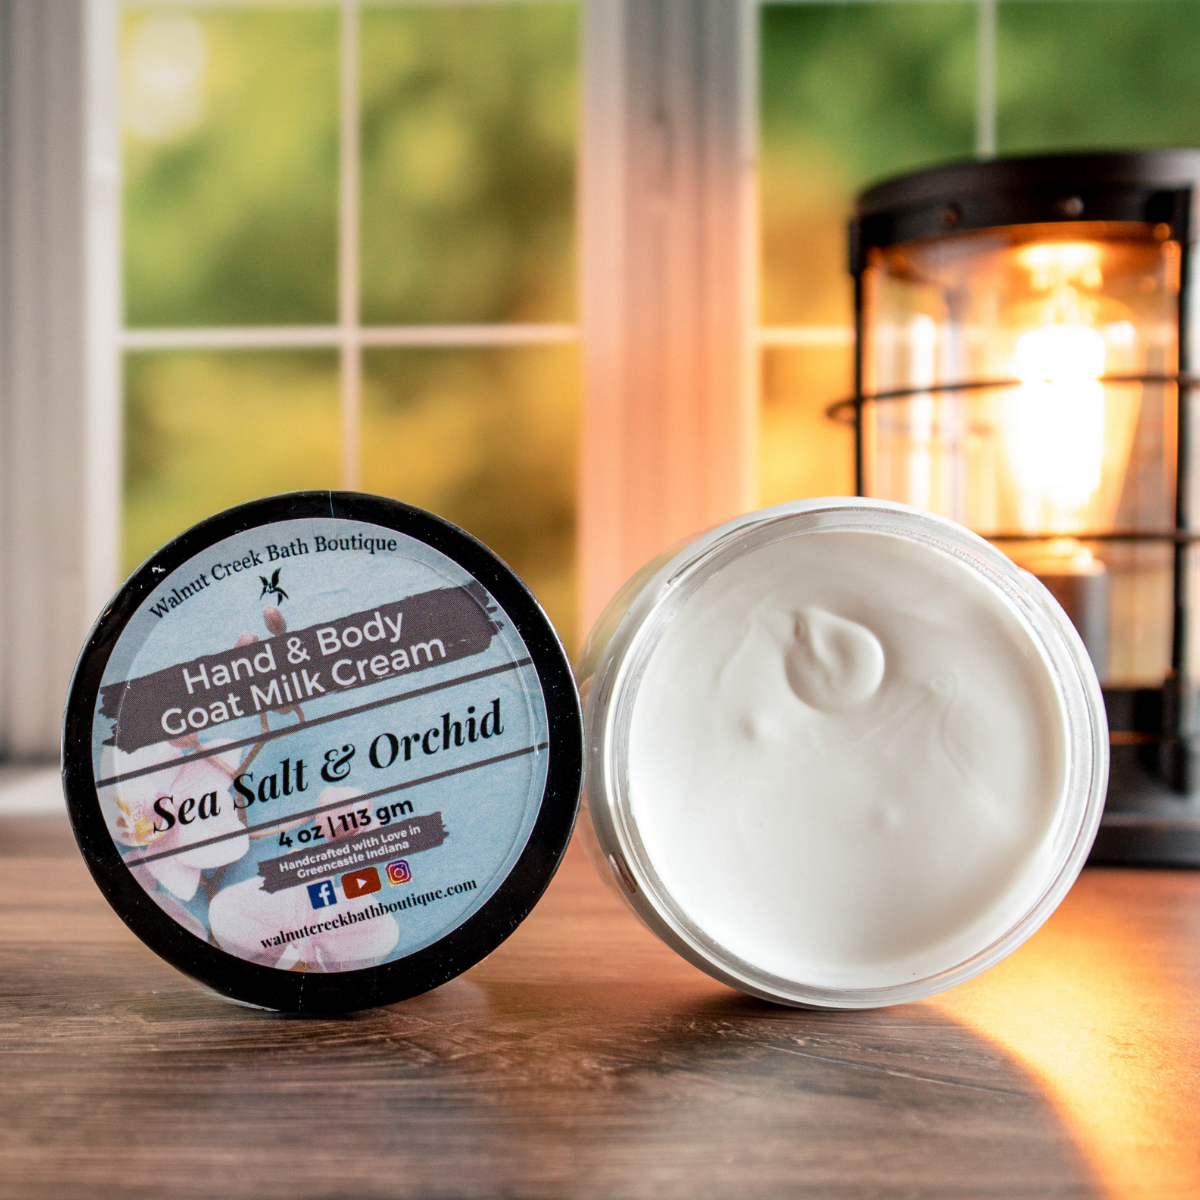 4 oz Sea Salt &amp; Orchid cream, one with top showing a pretty label of pink orchid flowers, next to this is an open jar showing contents. There is a lush green background behind a window and a light in the back right.